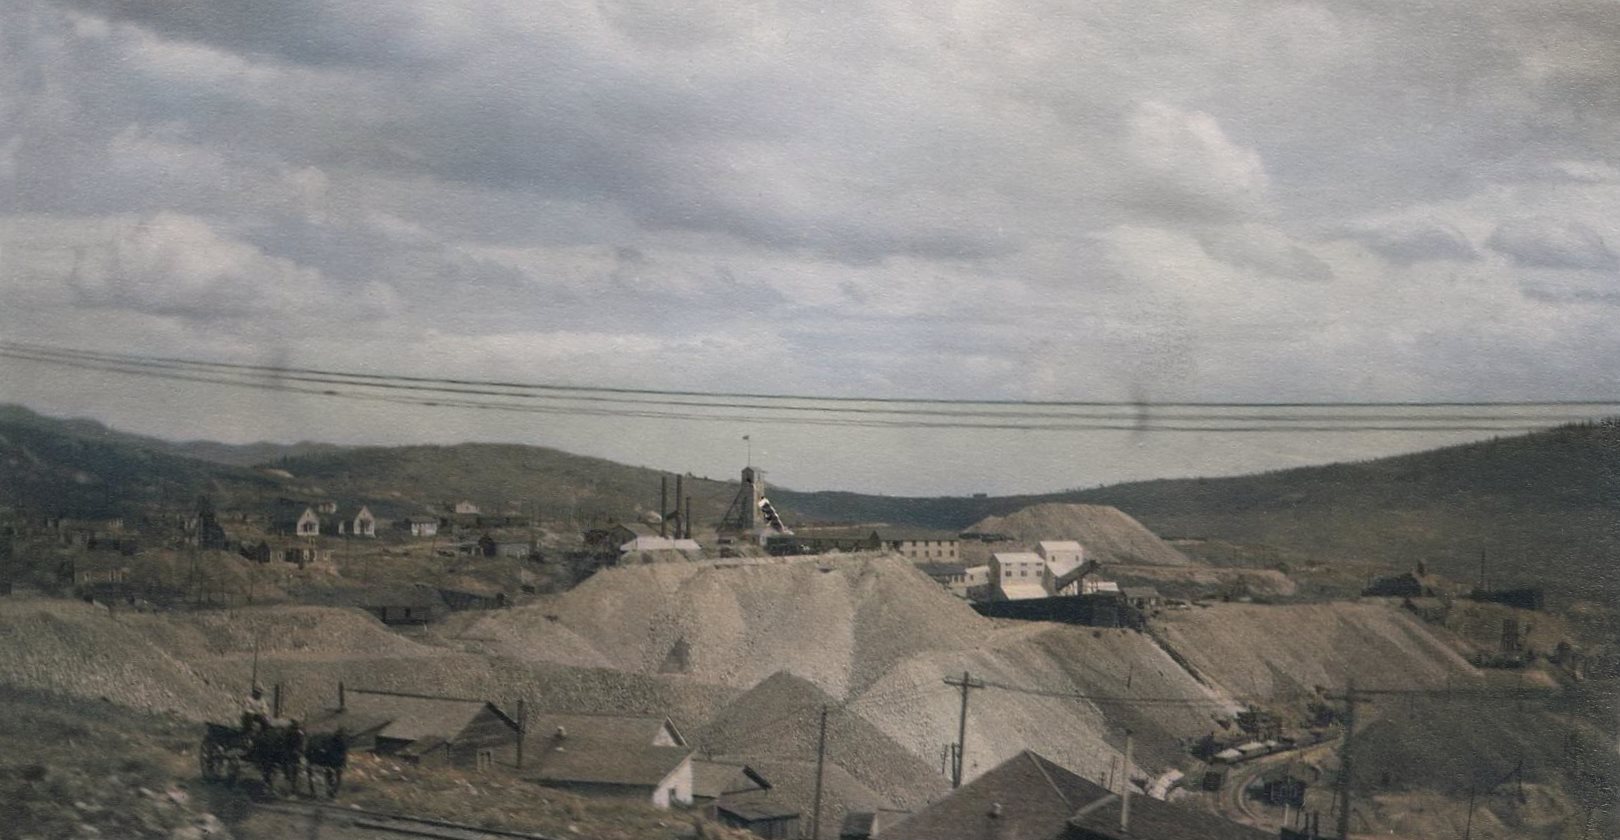 Tailings From Gold Mines Cripple Creek District | A Look Towards the Vindicator Mine Area